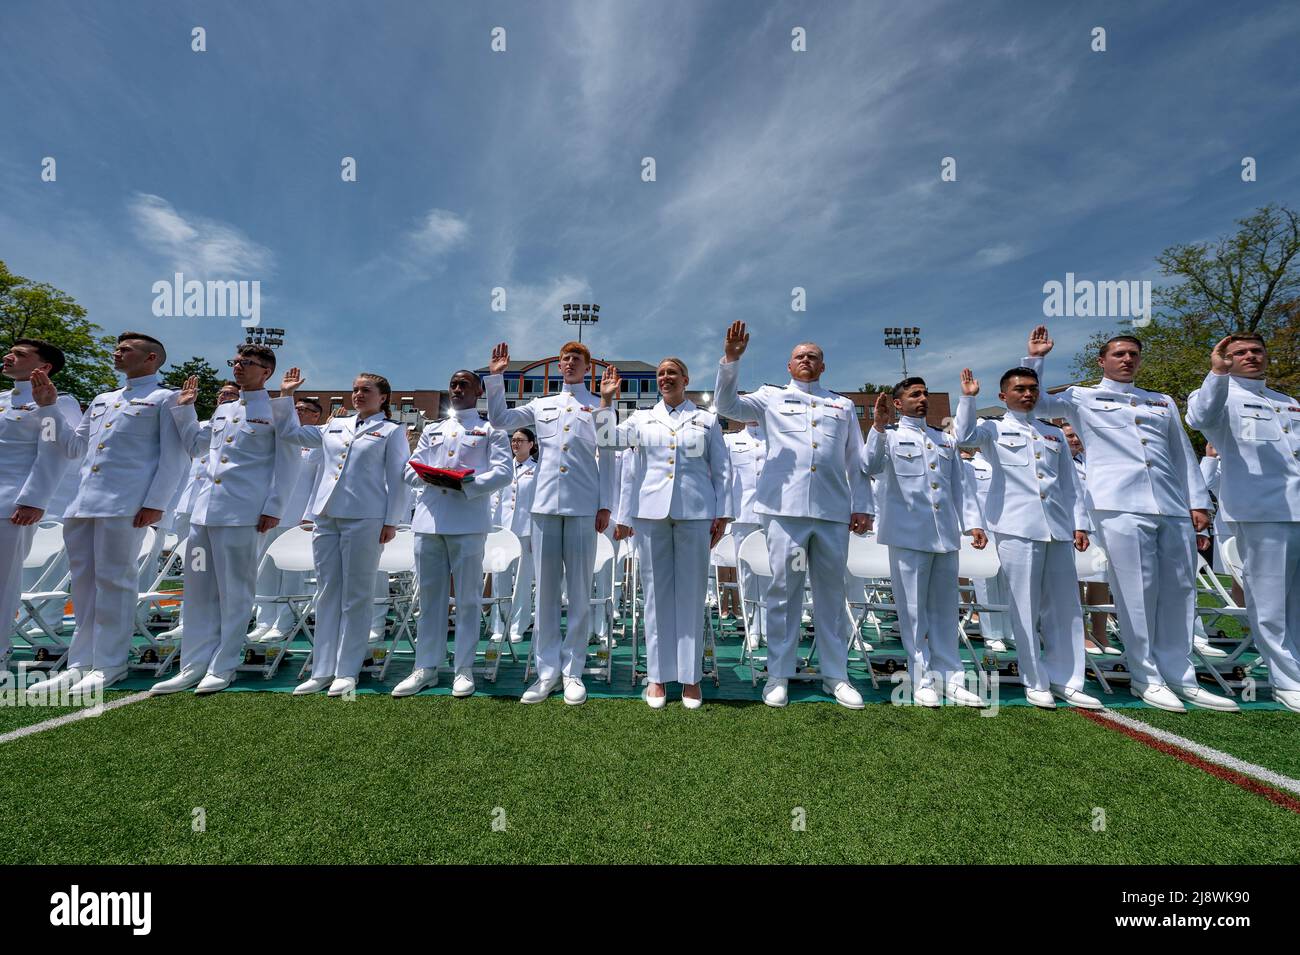 New London, United States of America. 18 May, 2022. U.S. Coast Guard Academy graduates take the oath of commission at the conclusion of the 141st Commencement Ceremony at the Coast Guard Academy, May 18, 2022 in New London, Connecticut. The Coast Guard Academy graduated 252 new officers along with nine international students. Credit: David Lau/U.S. Coast Guard Photo/Alamy Live News Stock Photo